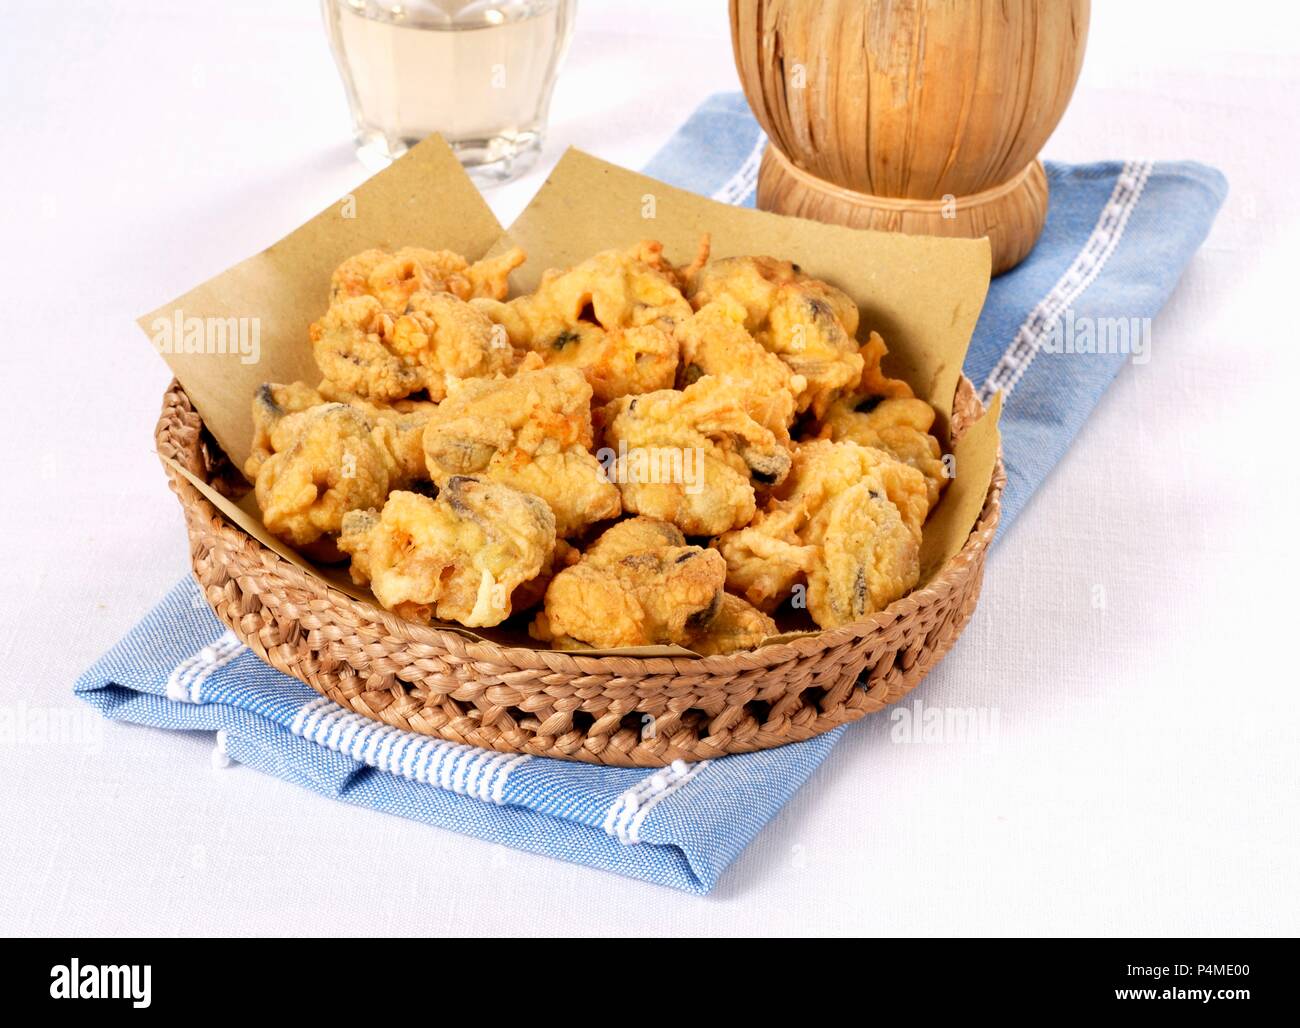 Frittelle di cozze (baked mussels from Italy) Stock Photo